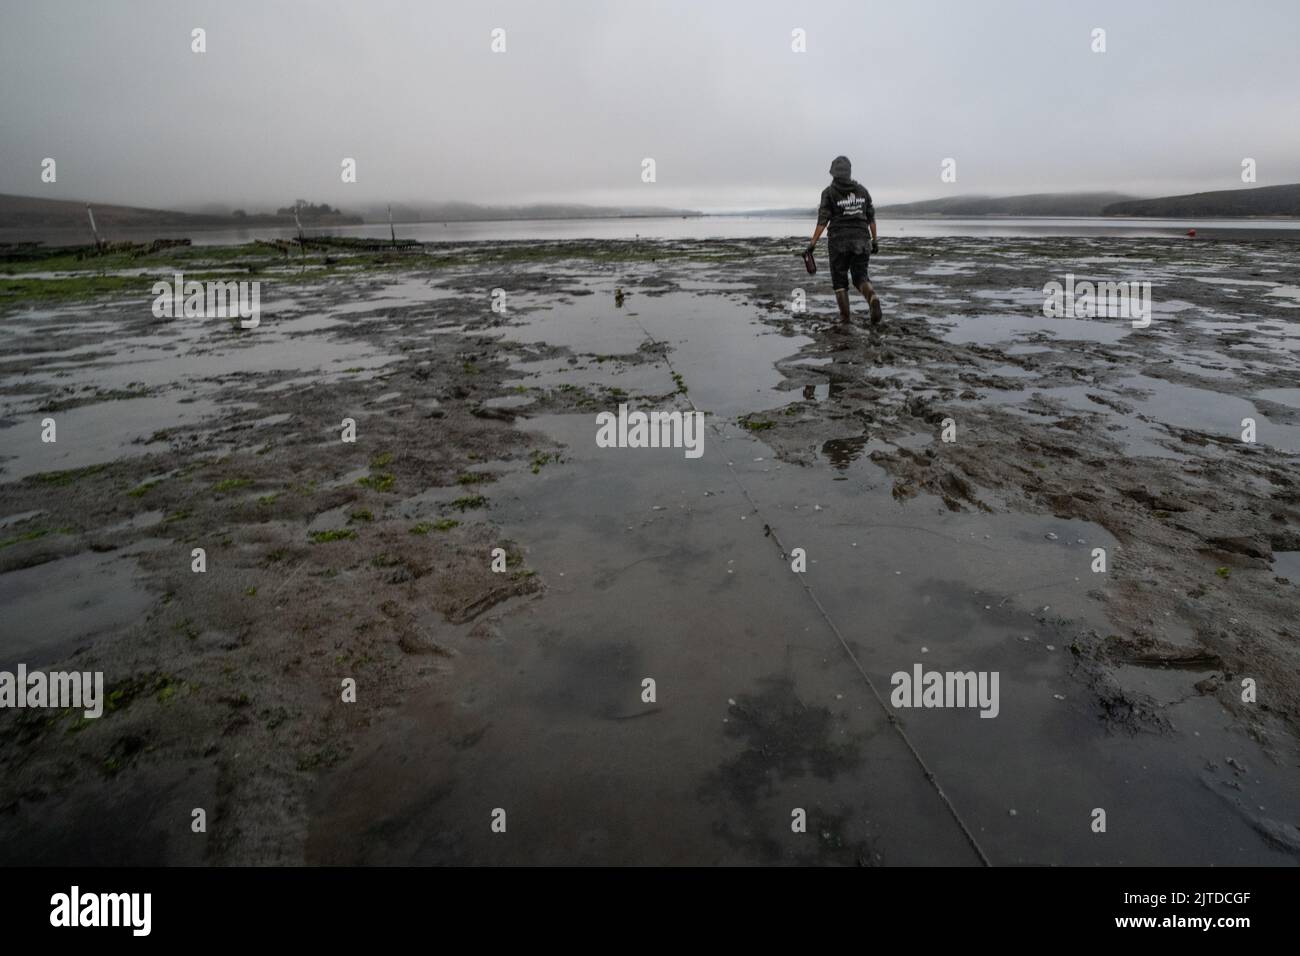 A single person walks across a mudflat at low tide in Tomales bay, California, USA. Stock Photo